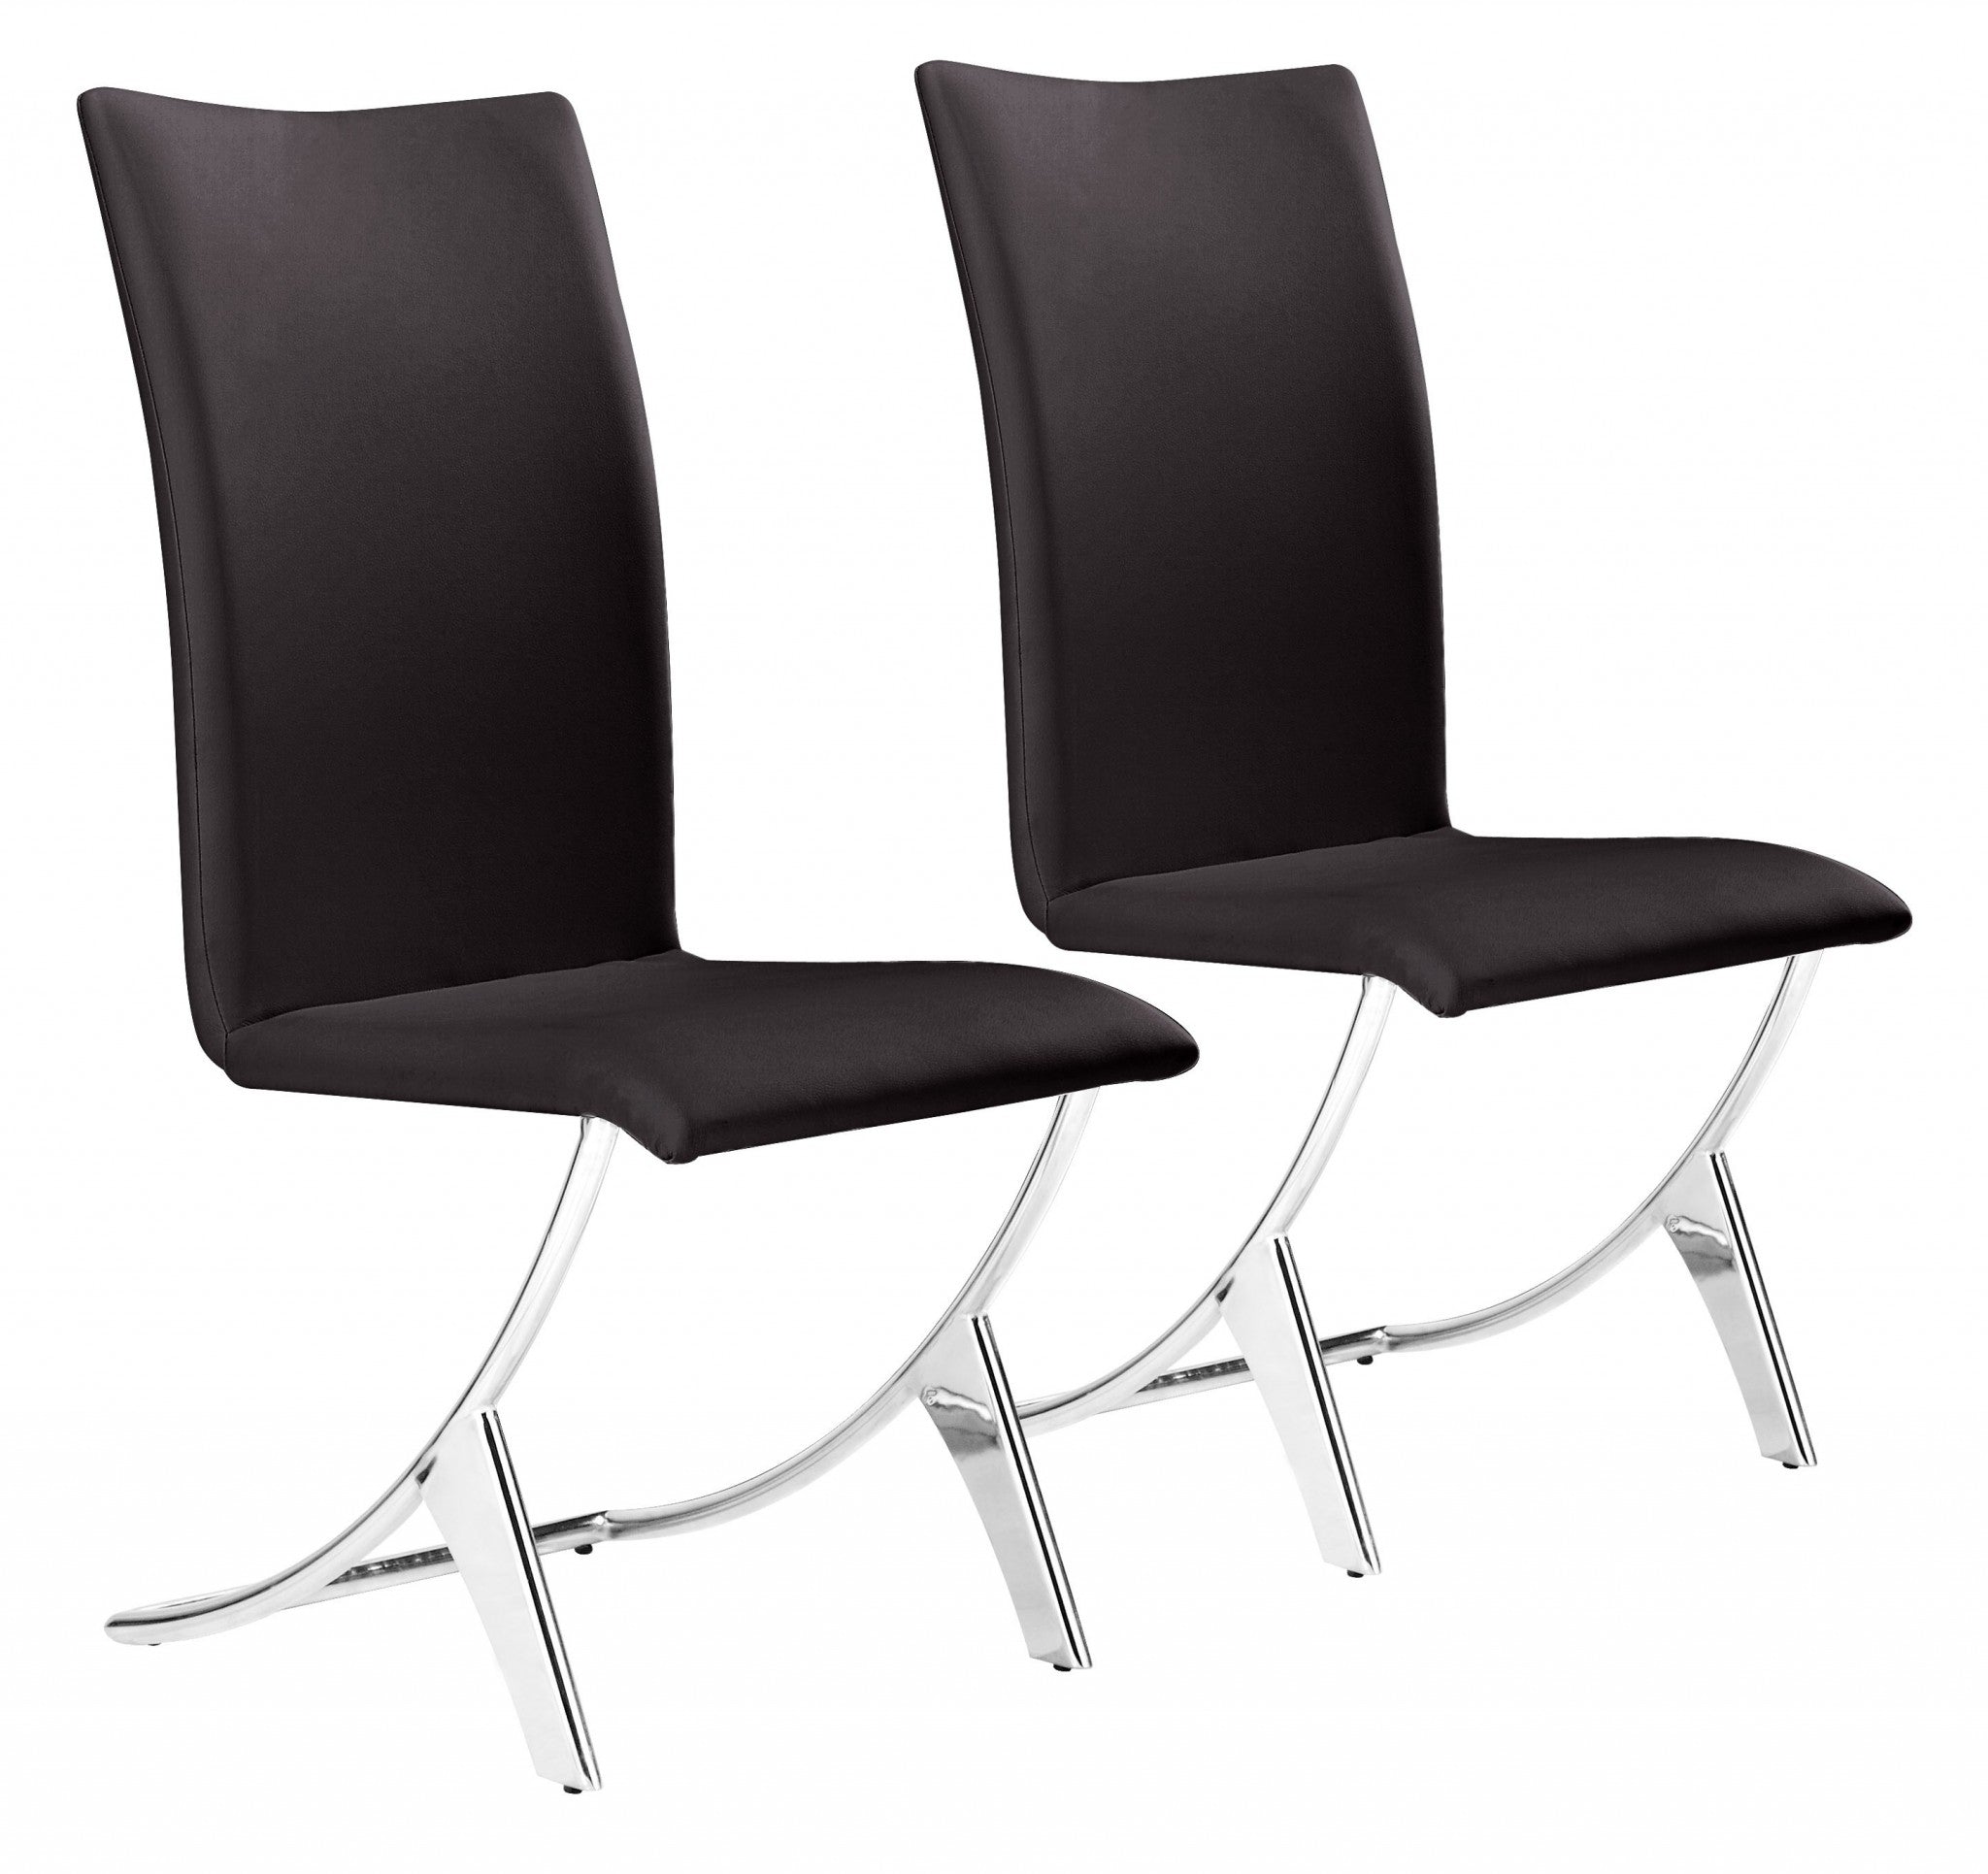 Set of Two Contempo Slim Brown Faux Leather and Stainless Dining Chairs